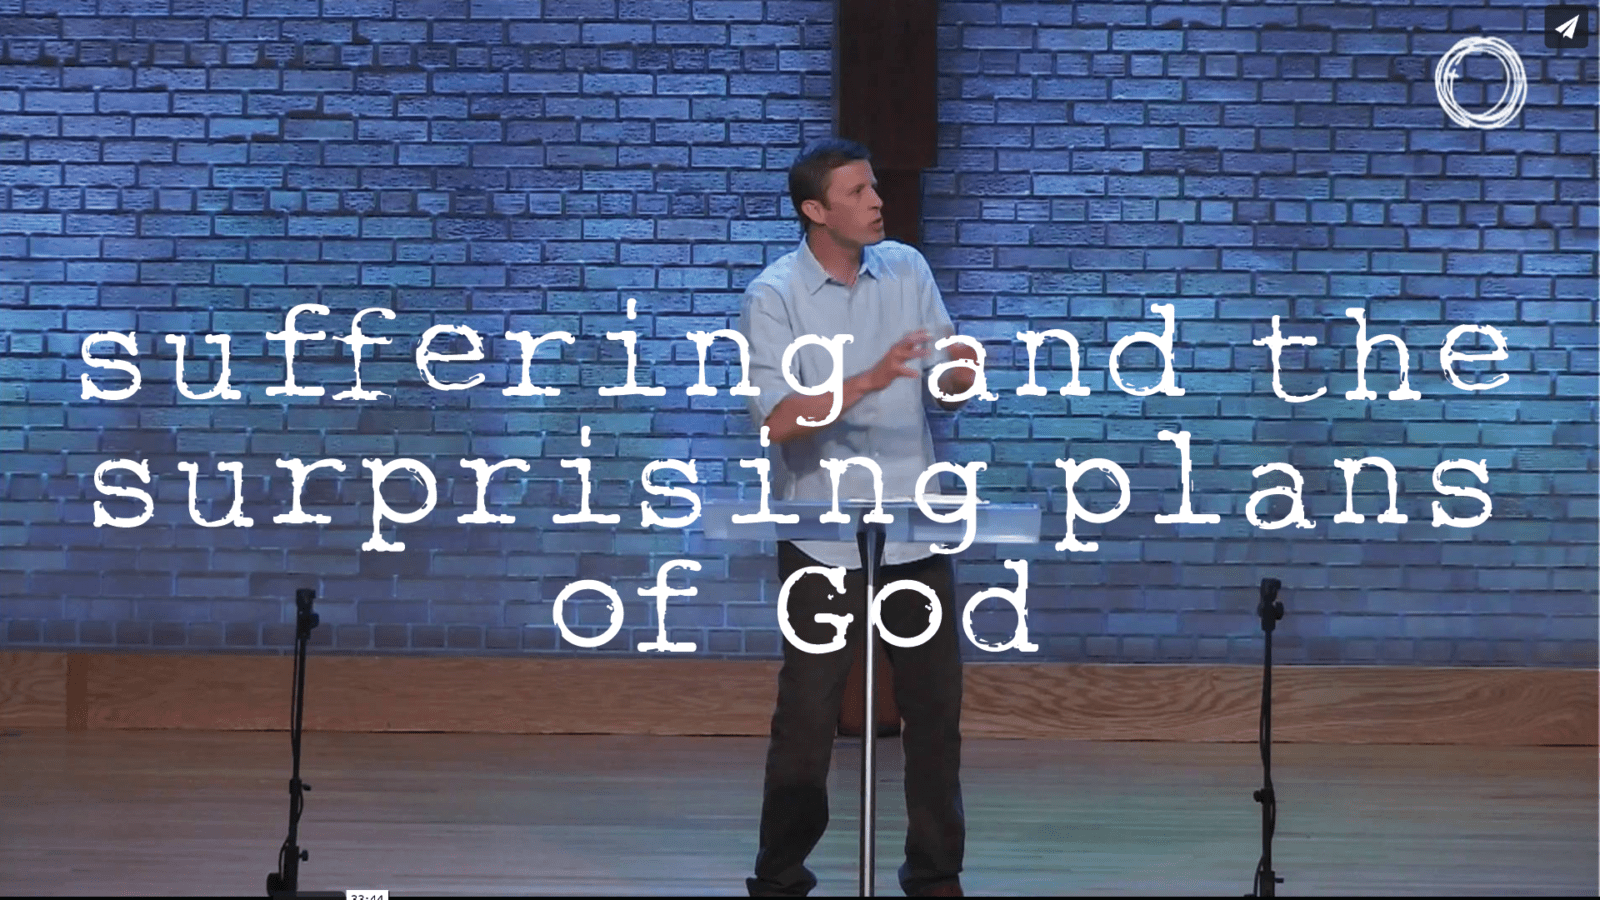 Suffering and the Surprising Plans of God